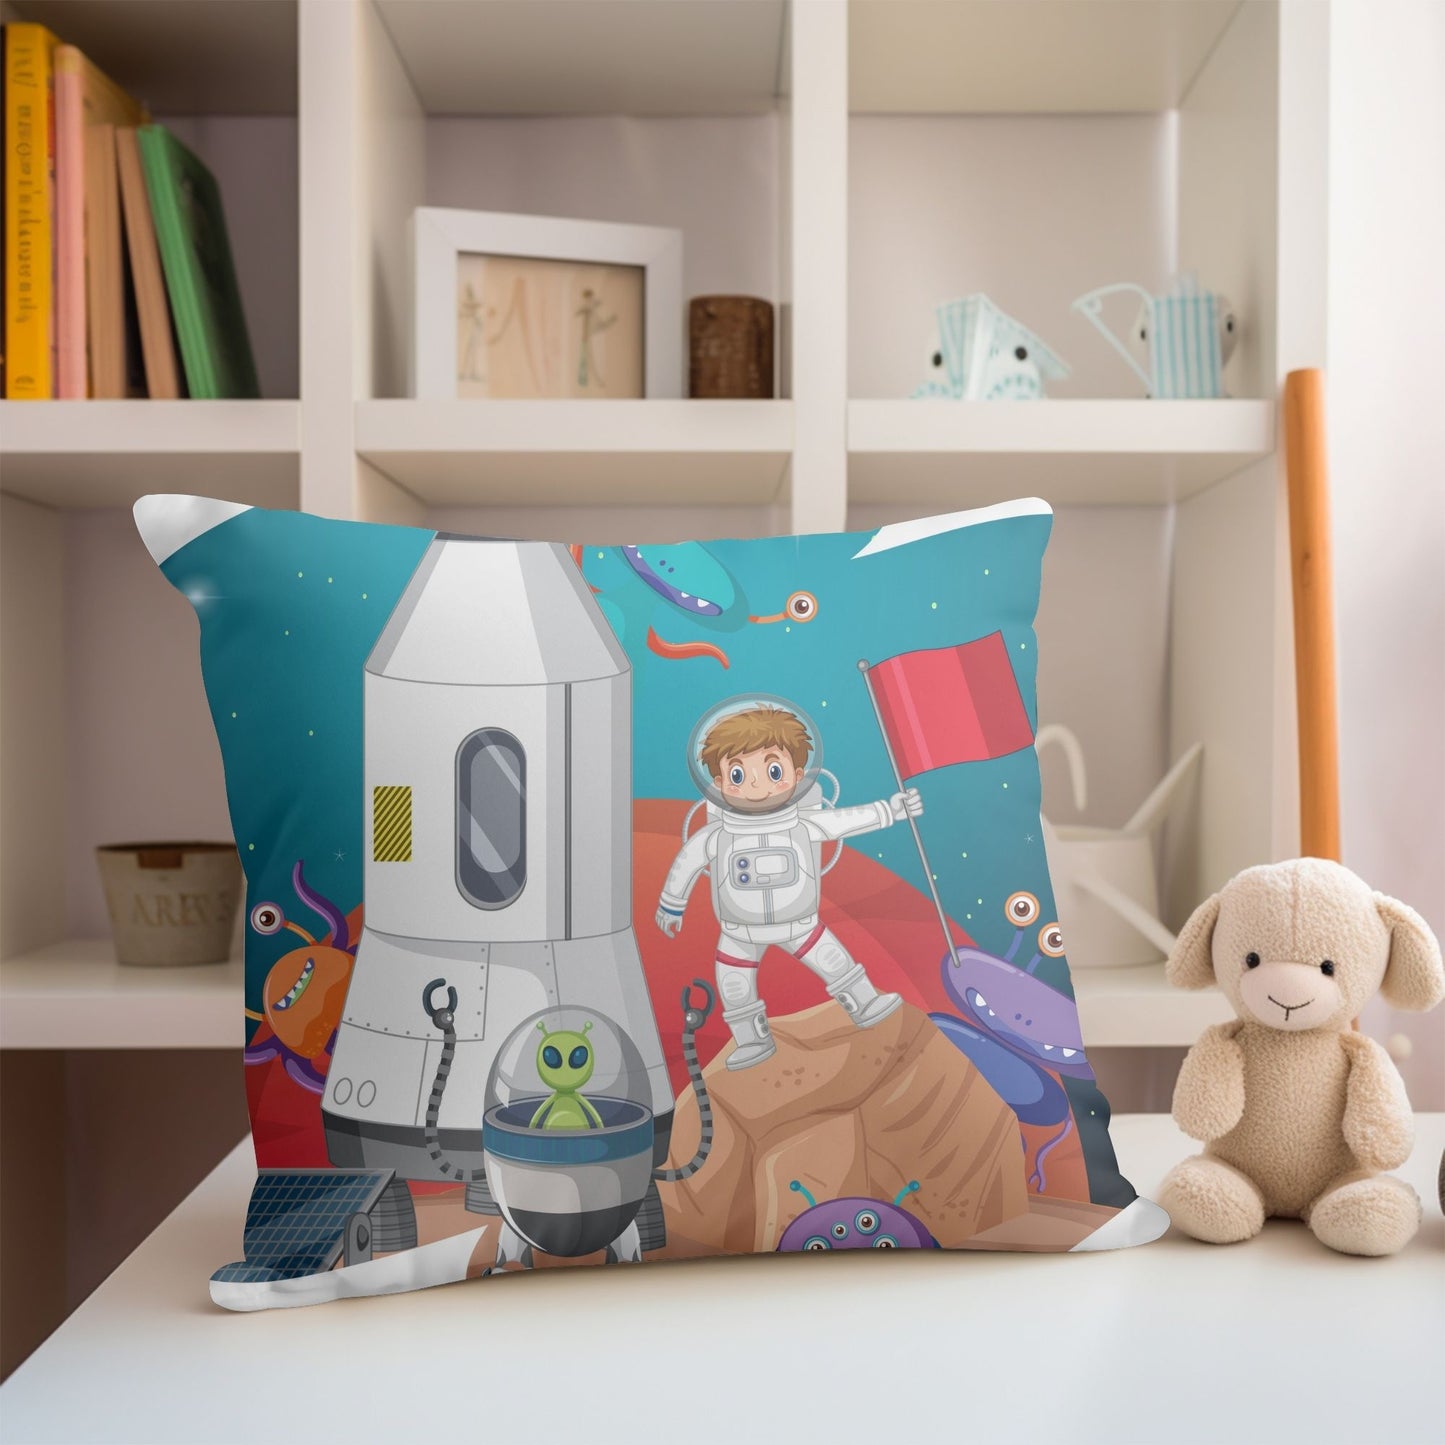 Kids pillow featuring a little boy on a space mission for adventurous dreams.